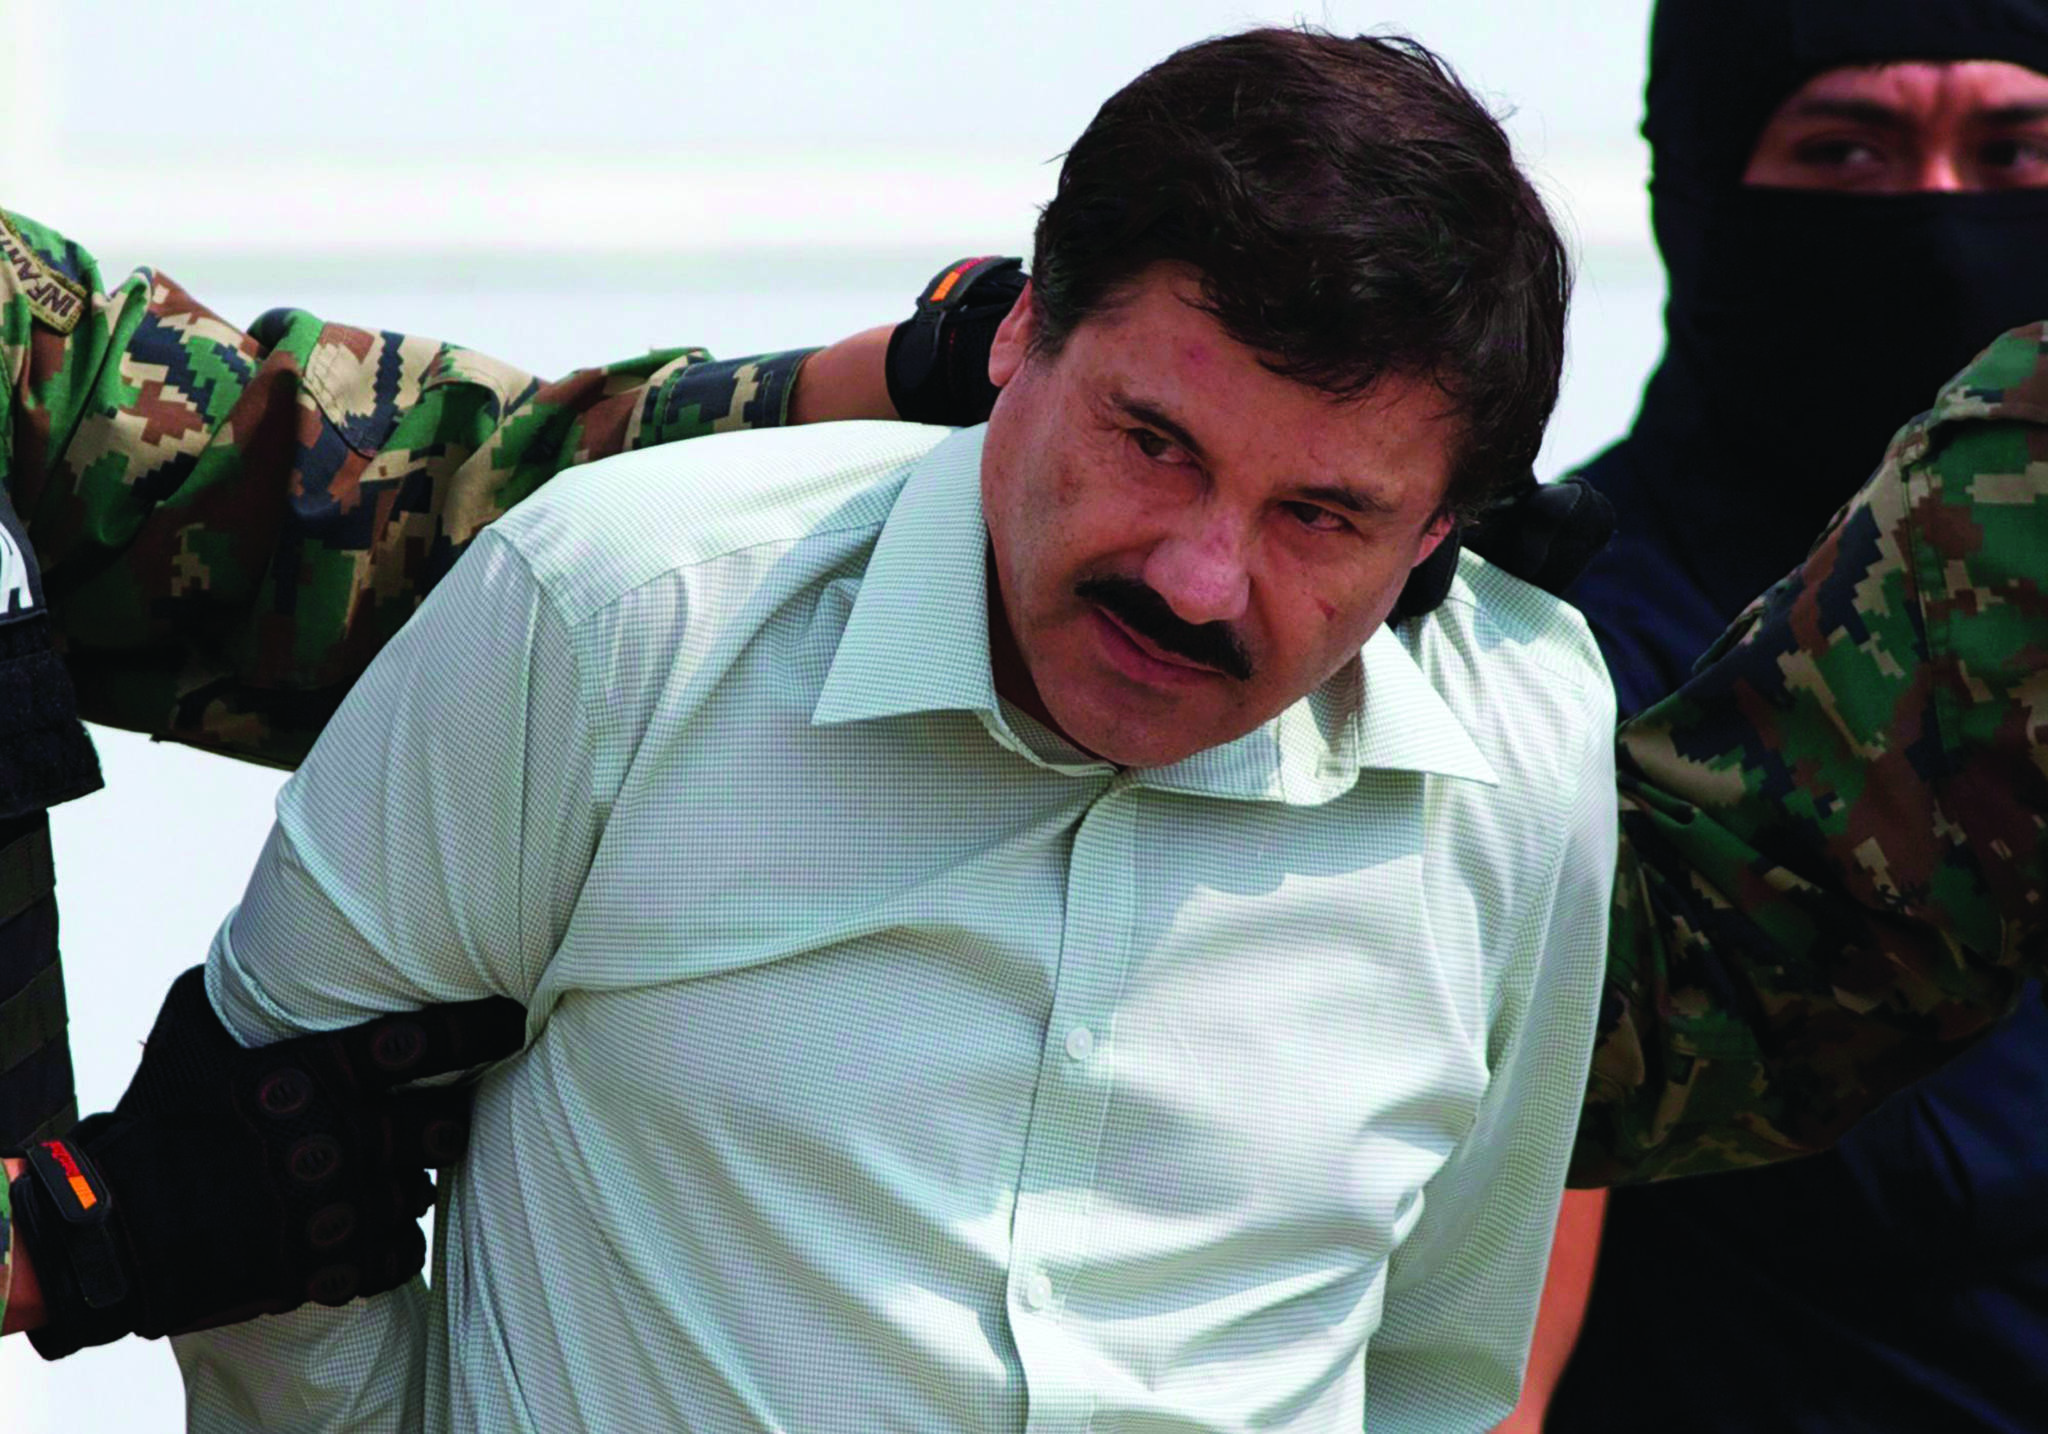 FILE - This Feb. 22, 2014 file photo shows Joaquin “El Chapo” Guzman, the head of Mexico’s Sinaloa Cartel, being escorted to a helicopter in Mexico City following his capture overnight in the beach resort town of Mazatlan. The lawyer for Guzman says his client’s mental health is deteriorating. Eduardo Balarezo told reporters on Tuesday, April 17, 2018, that he’s seeking a psychological evaluation for Guzman before he goes to trial later this year in federal court in New York. The lawyer spoke outside court following a pretrial hearing. (AP Photo/Eduardo Verdugo, File)